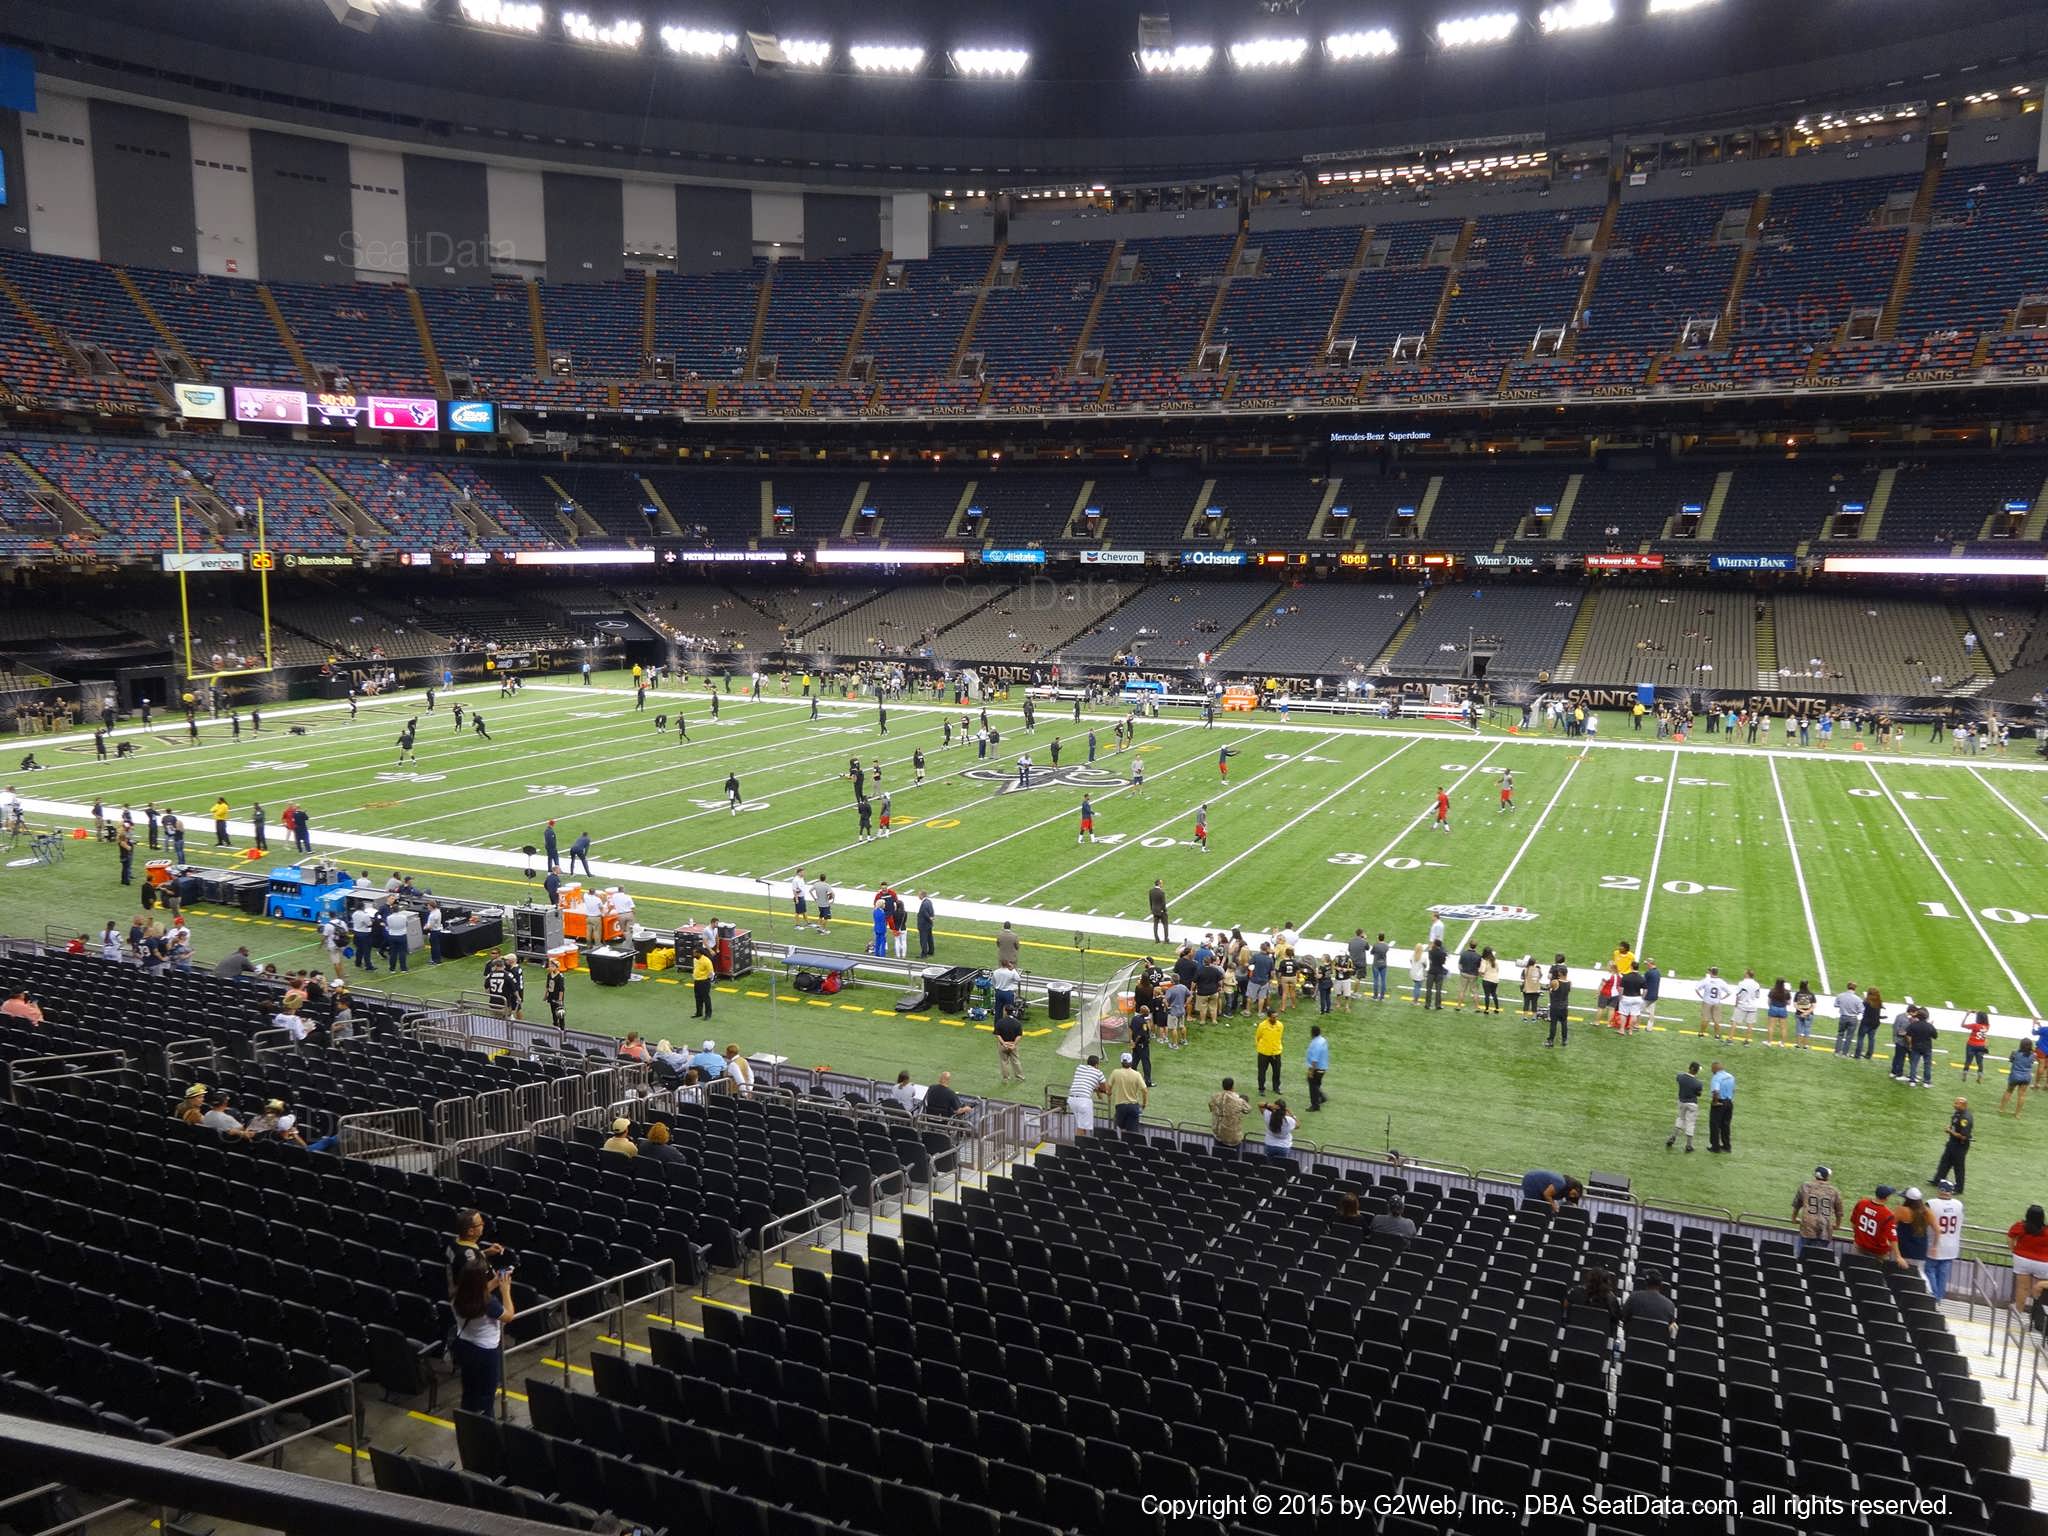 Seat view from section 217 at the Mercedes-Benz Superdome, home of the New Orleans Saints